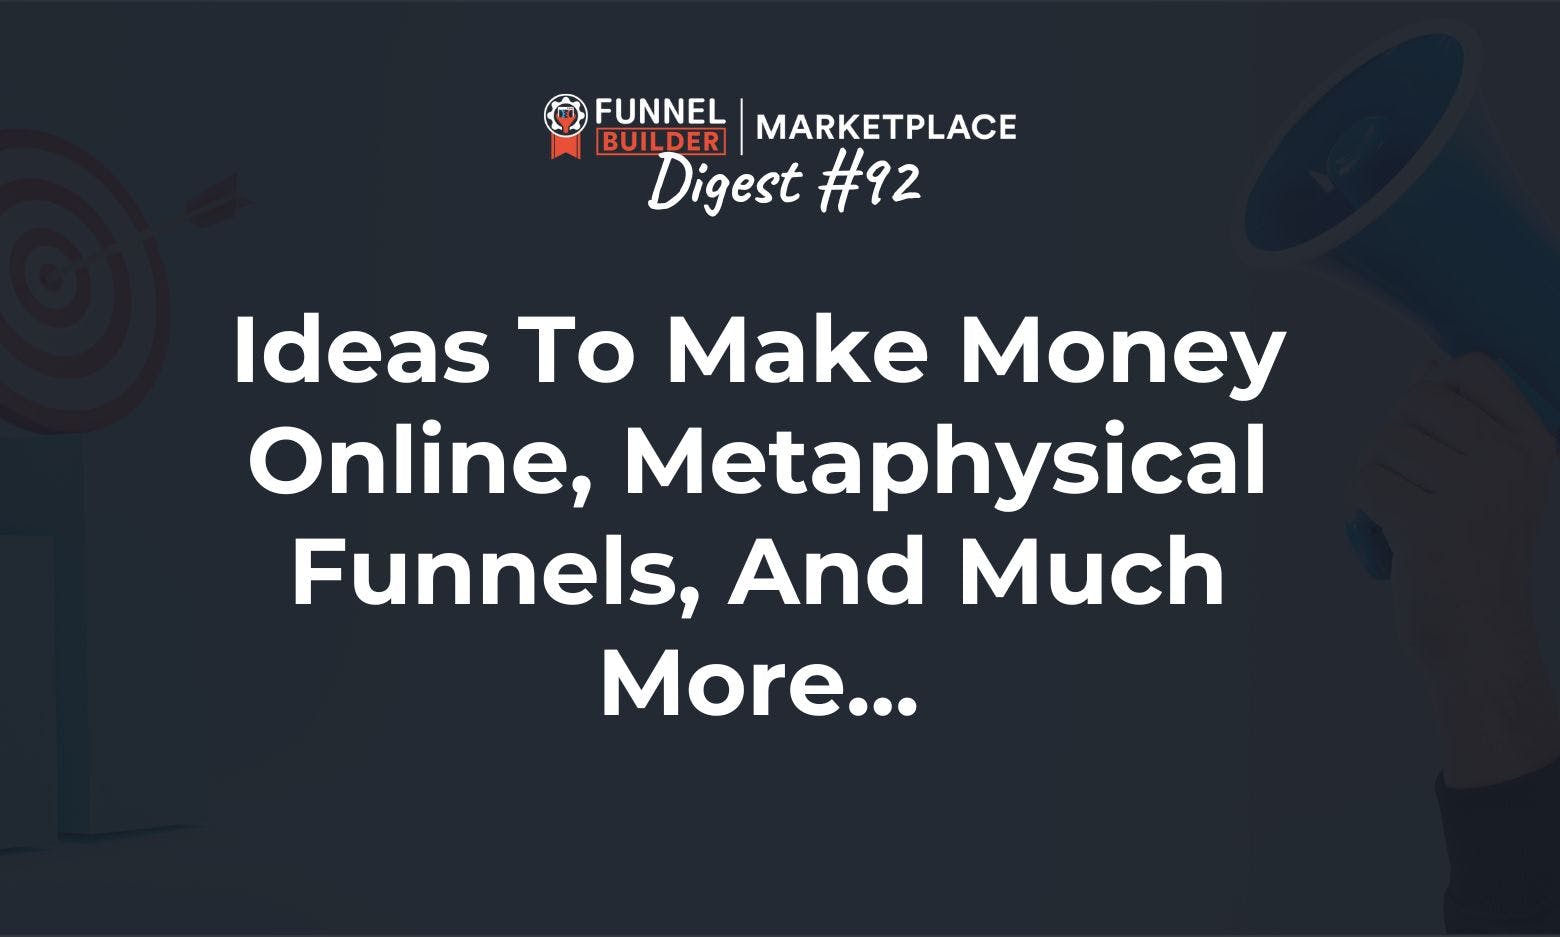 FBM Digest #92: Ideas to make money online, metaphysical funnels, and much more...